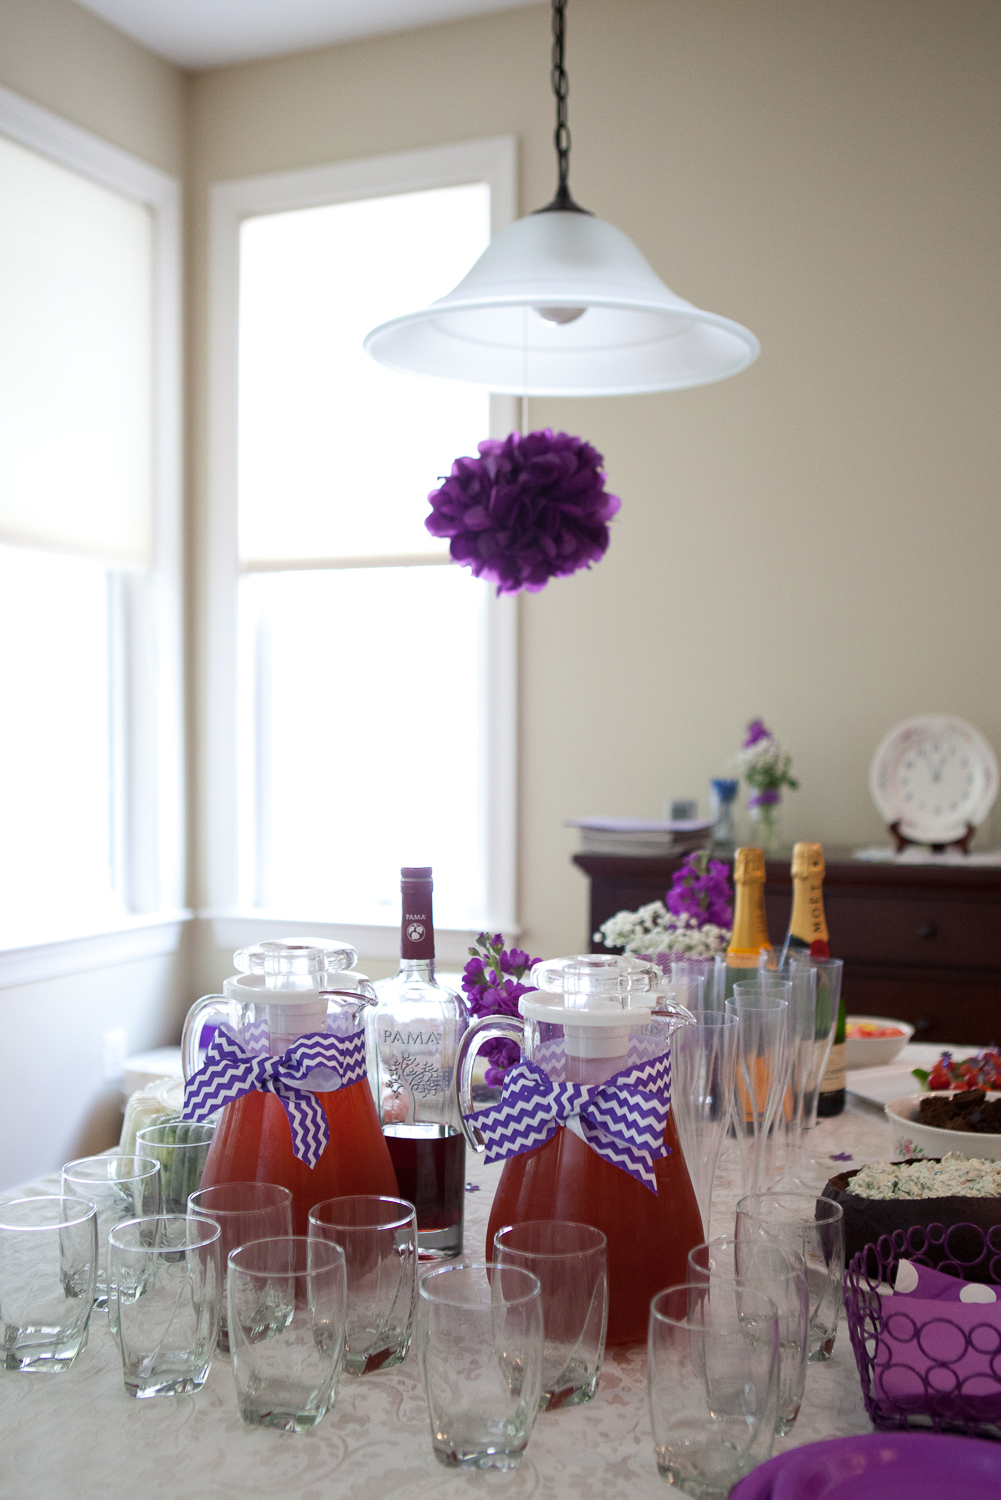 why-hire-a-photographer-for-your-bridal-shower-7.jpg